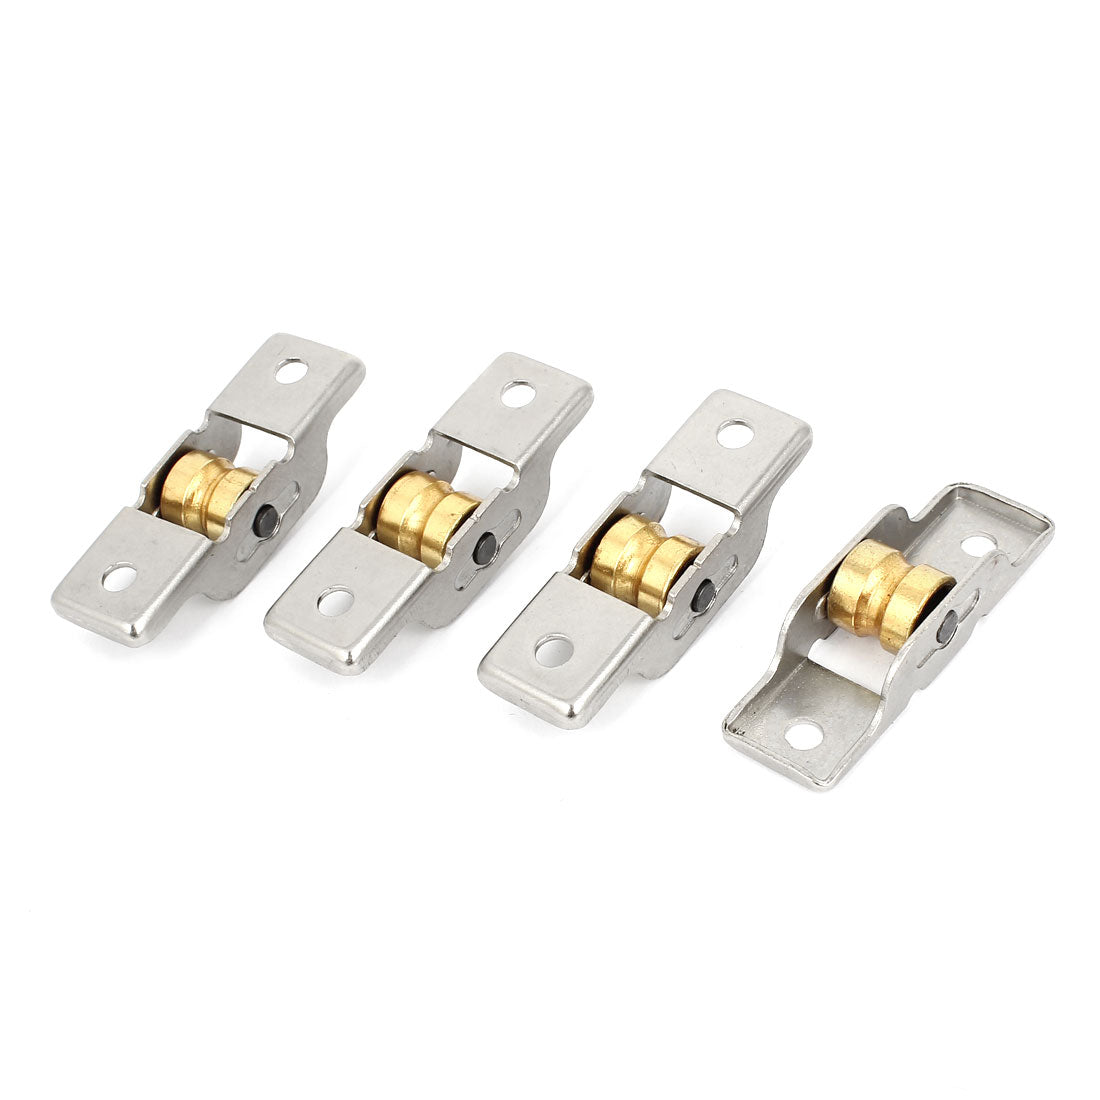 Uxcell Uxcell 4 Pcs Gold Tone Axle Roller Wheel Sash Pulley for Sliding Door Window